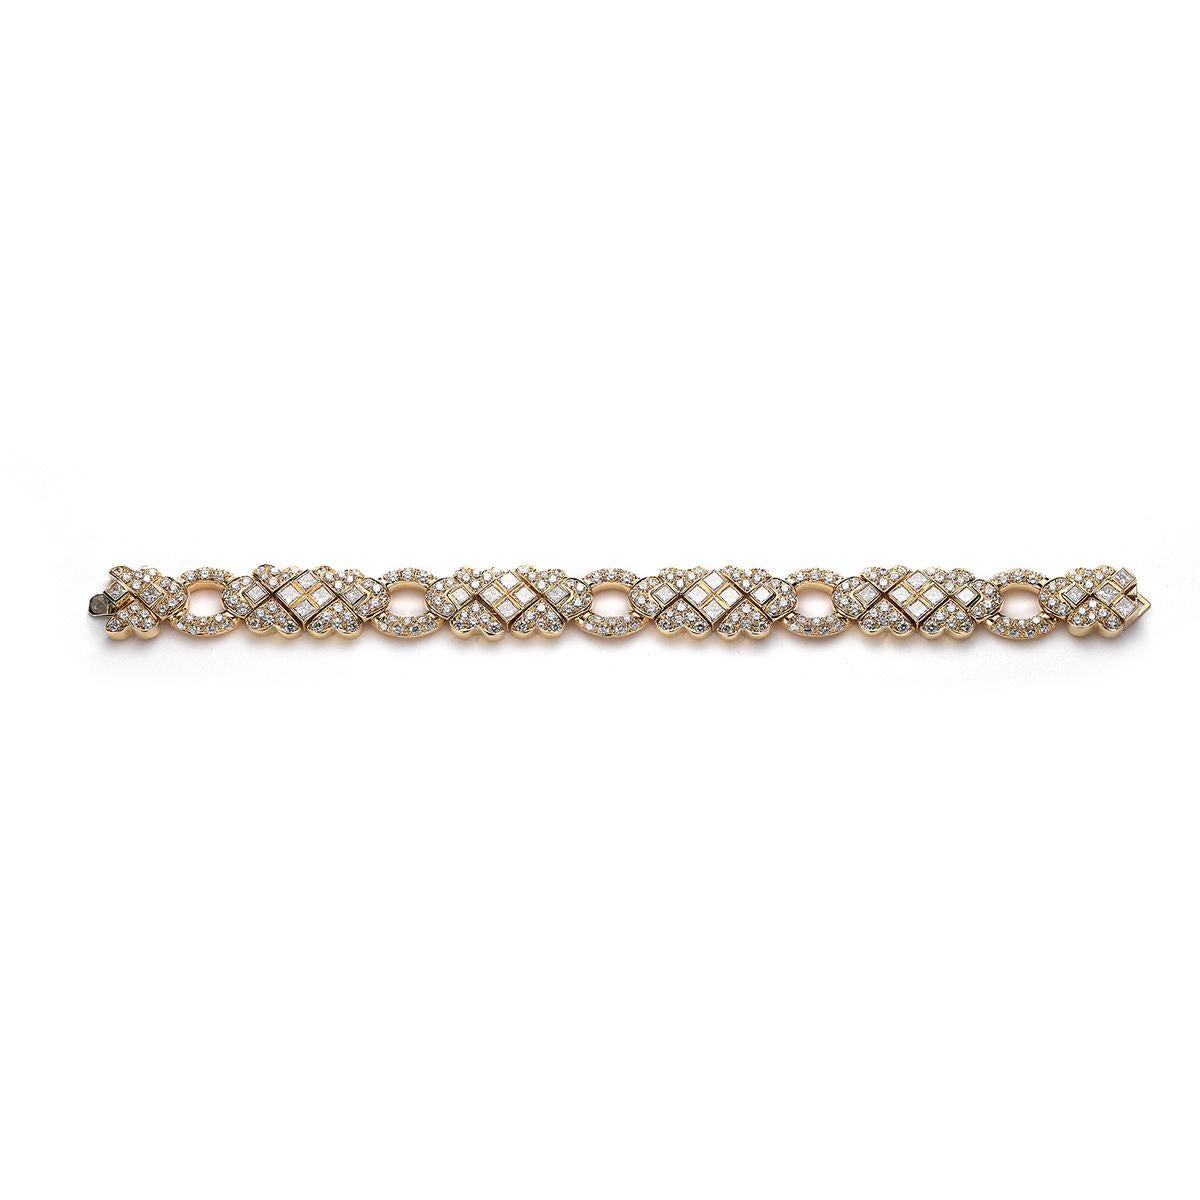 Bracelet in 18kt pink gold set with 240 diamonds 8.01 cts and 30 princess cut diamonds 5.18 cts